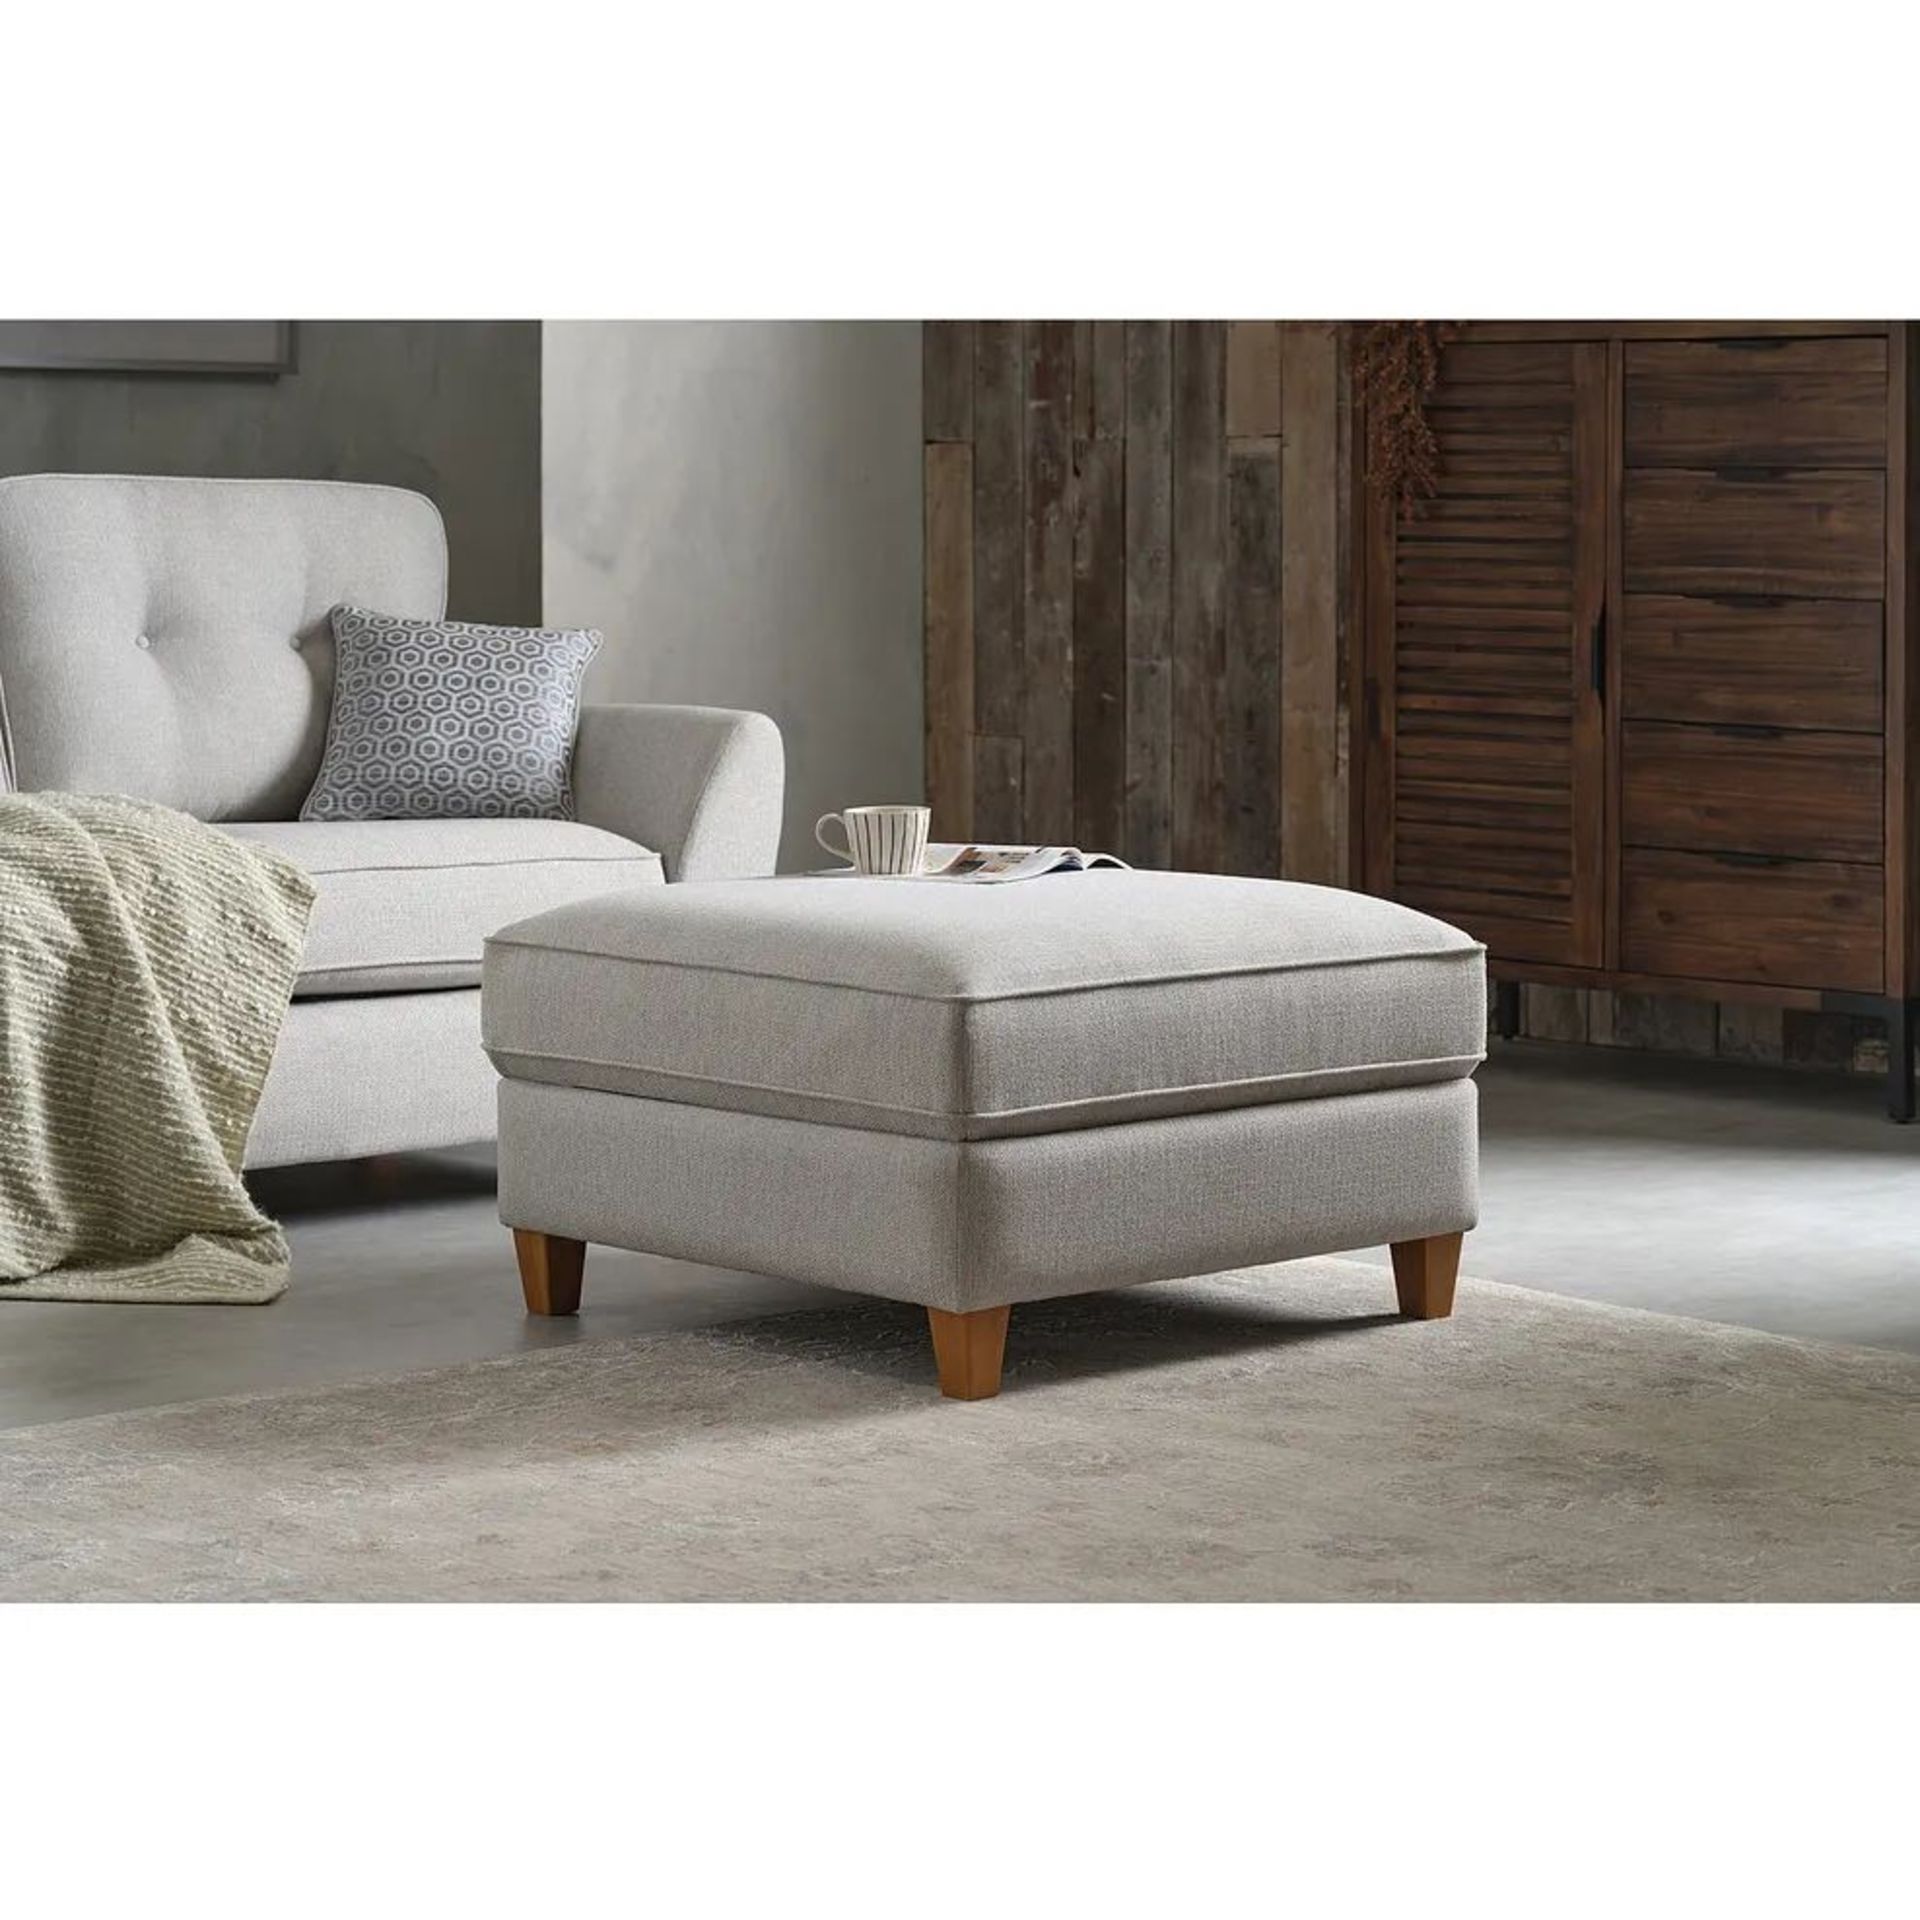 BRAND NEW INCA Large Storage Footstool - SILVER FABRIC. RRP £529. Our large Inca storage footstool - Image 7 of 7